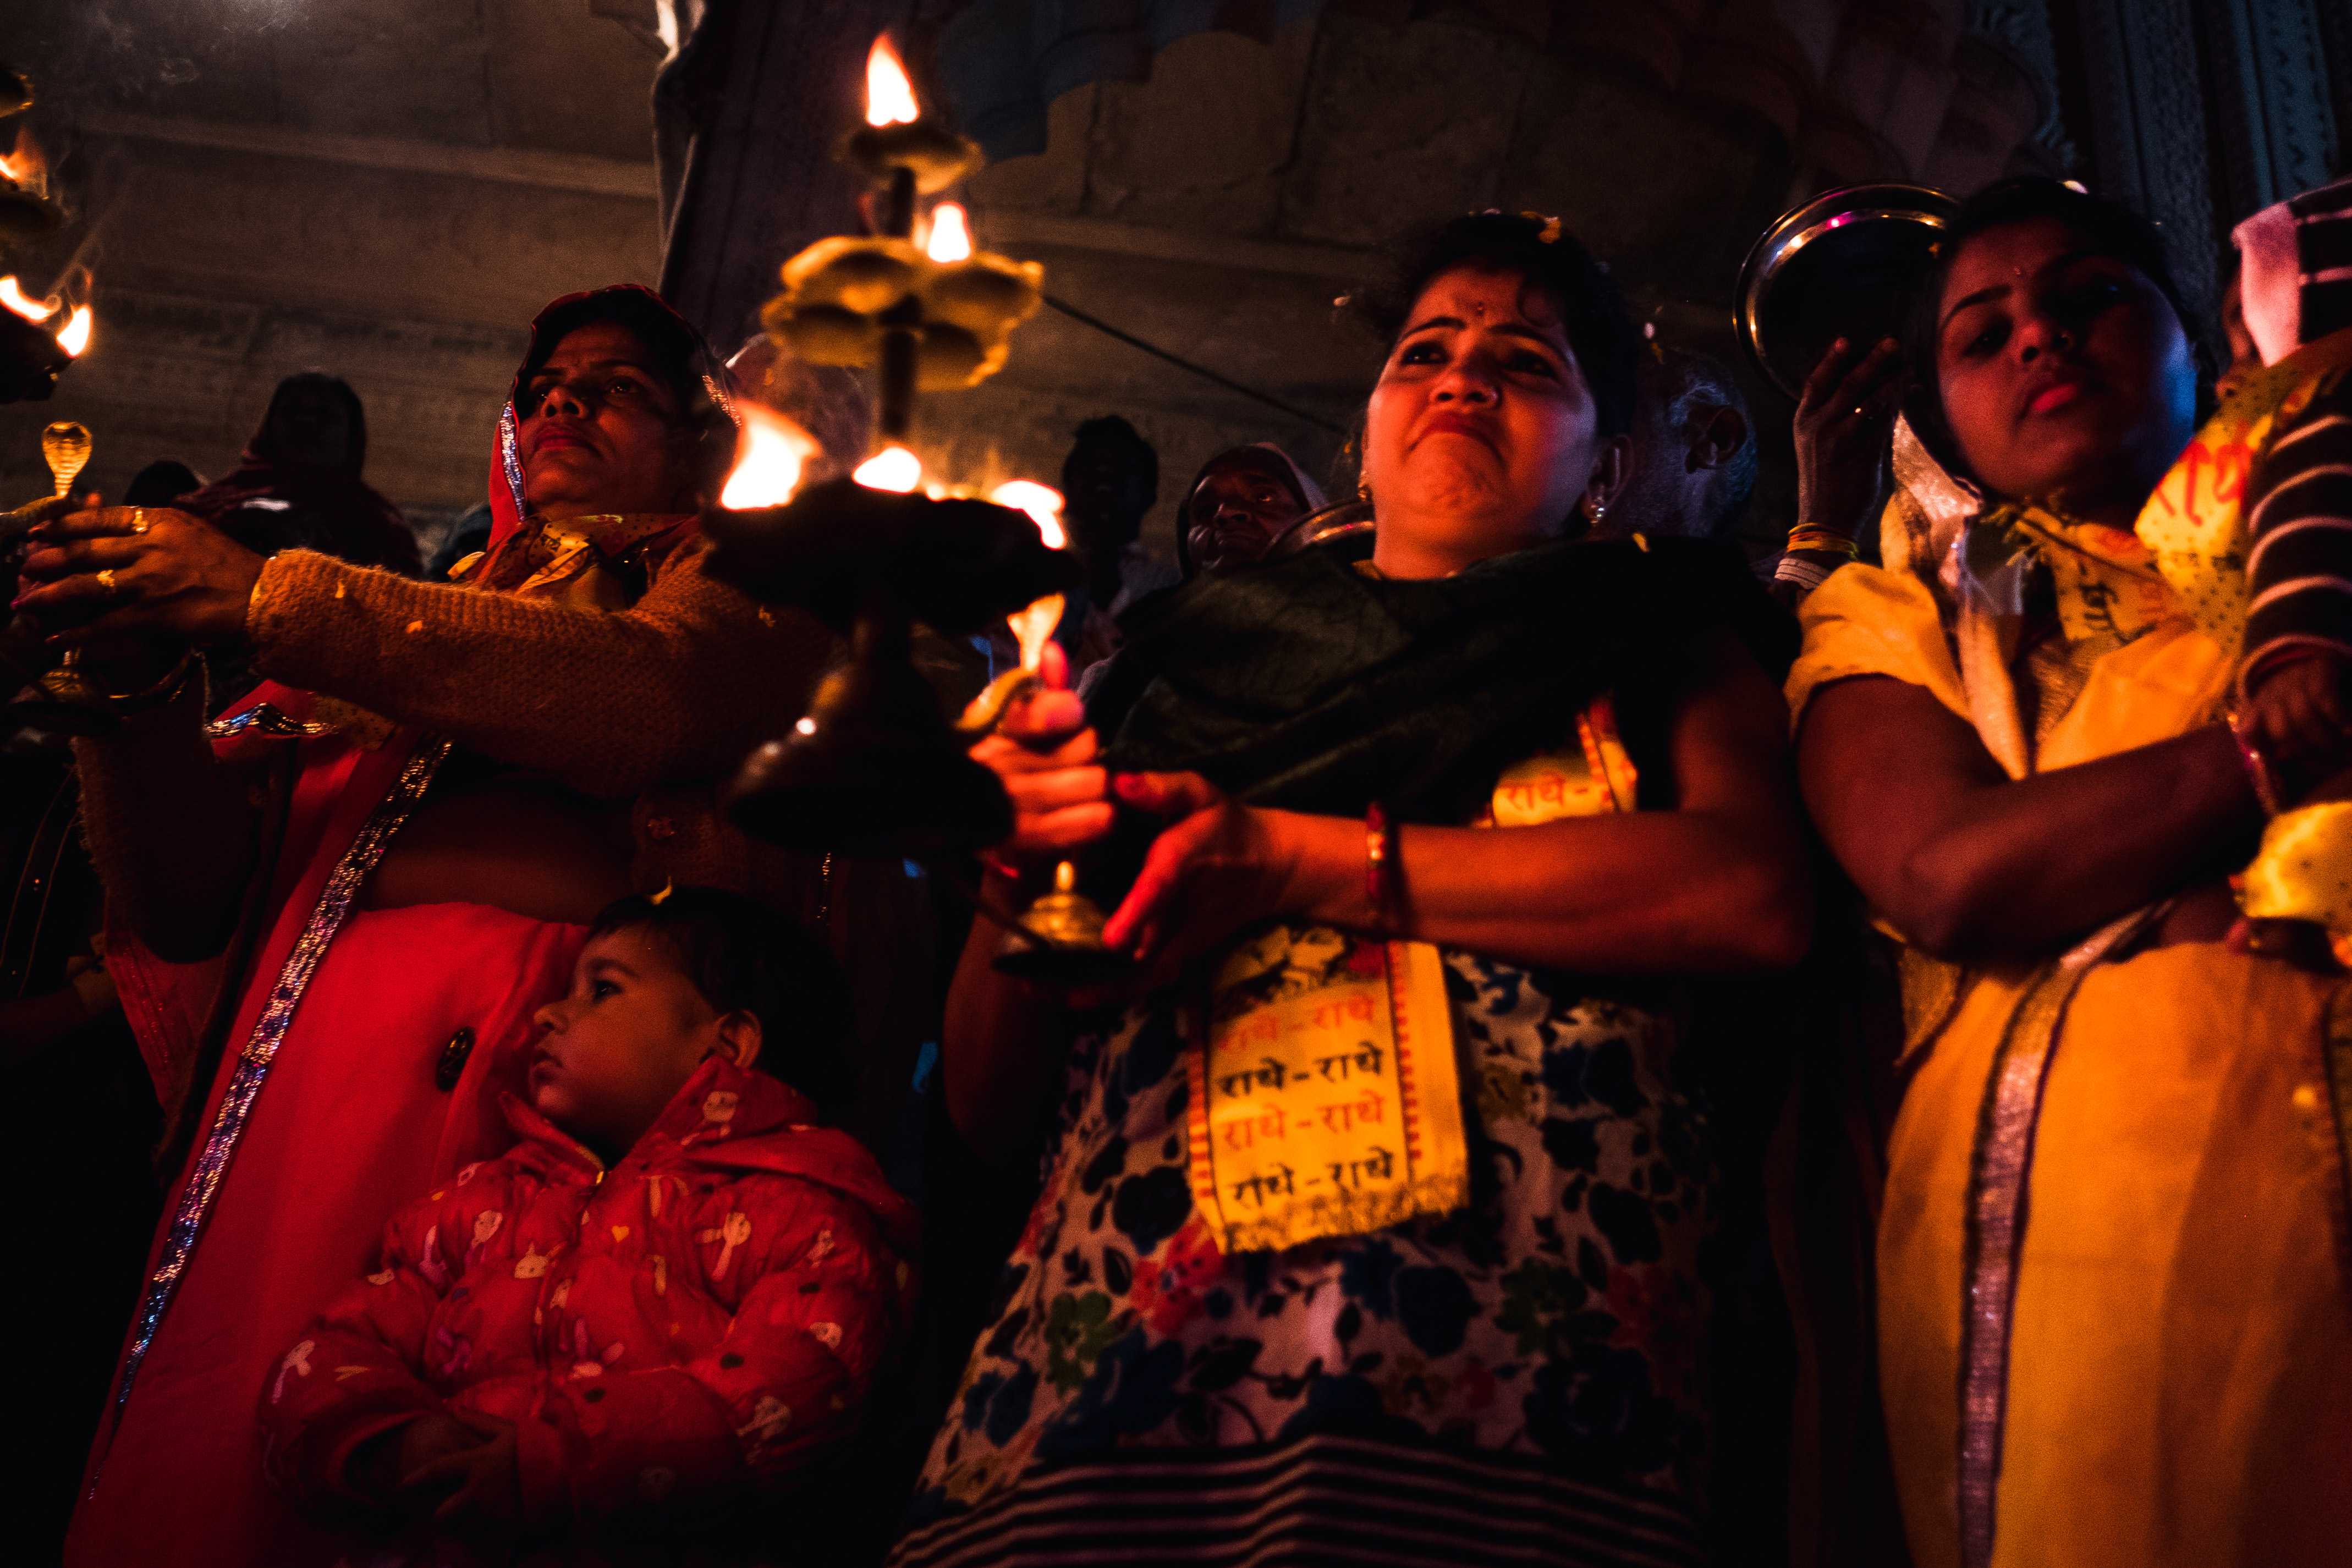 India Street Photography During Holi Festival. Lady cries during prayer. Images by Jason Vinson